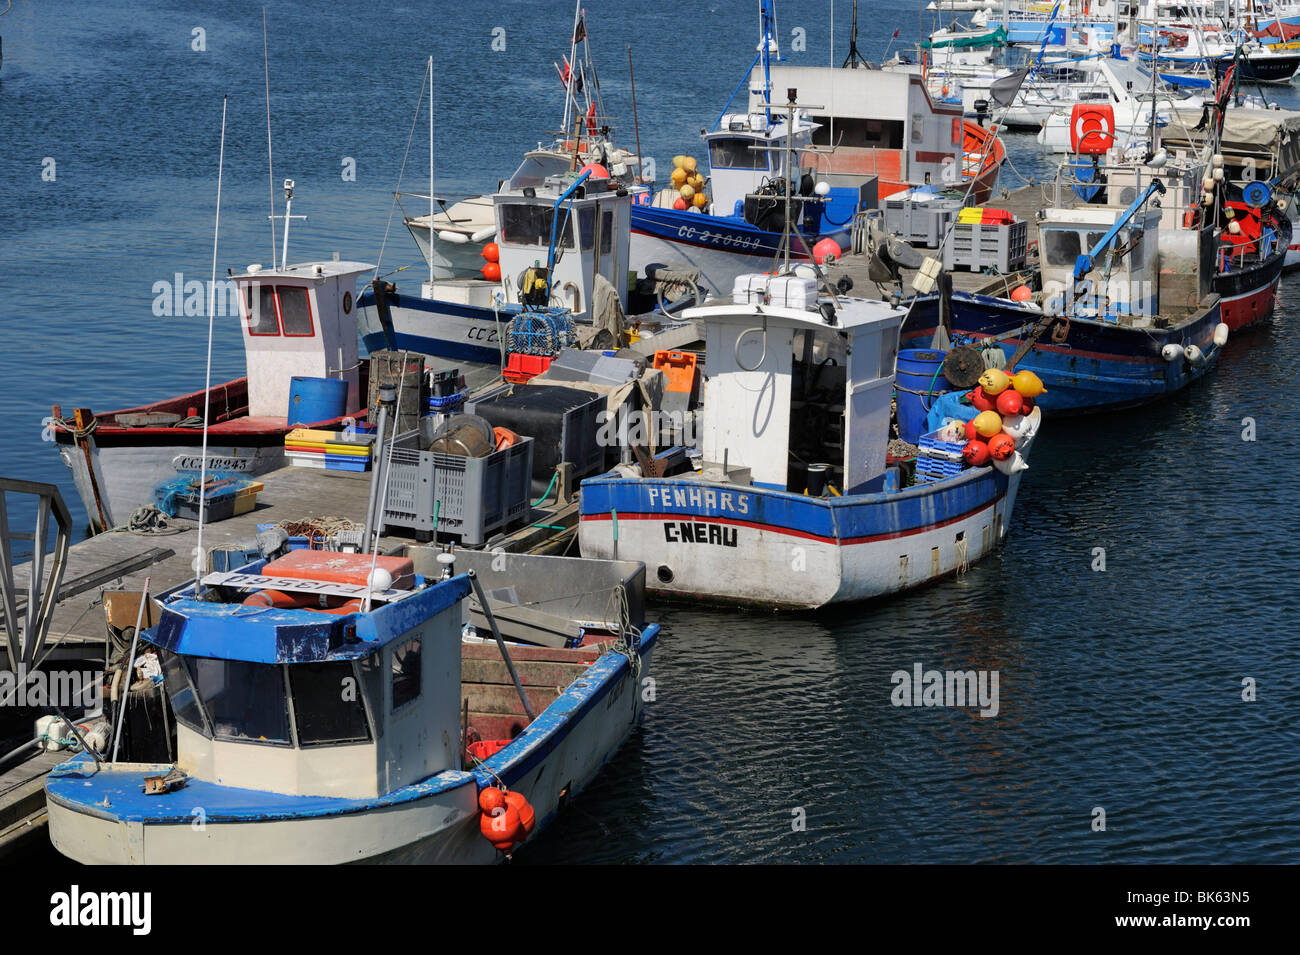 Fishing boats, Concarneau, Finistere, Brittany, France, Europe Stock Photo